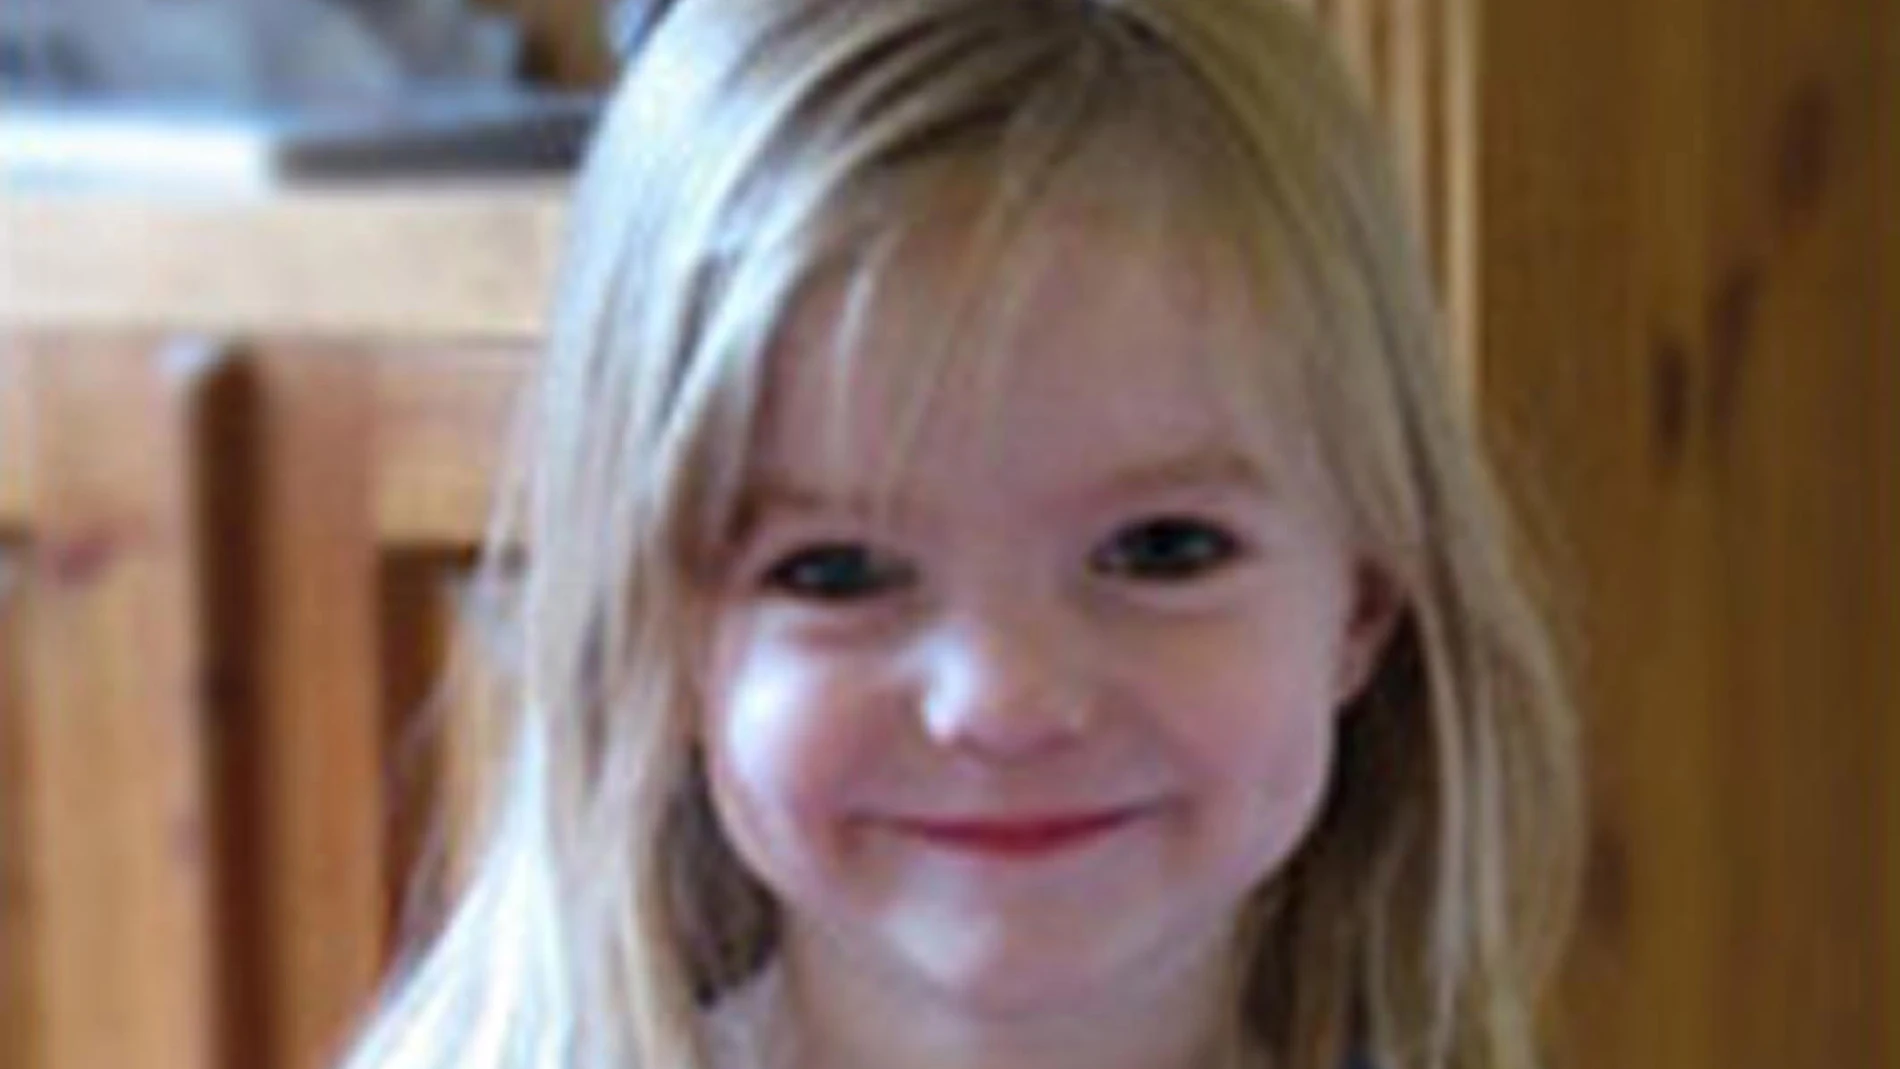 Great Britain 2007.Undated file of the missing British 4 year old Madeleine McCann..She was on holiday in Portugal with her parents. (Foto de ARCHIVO) 04/06/2020